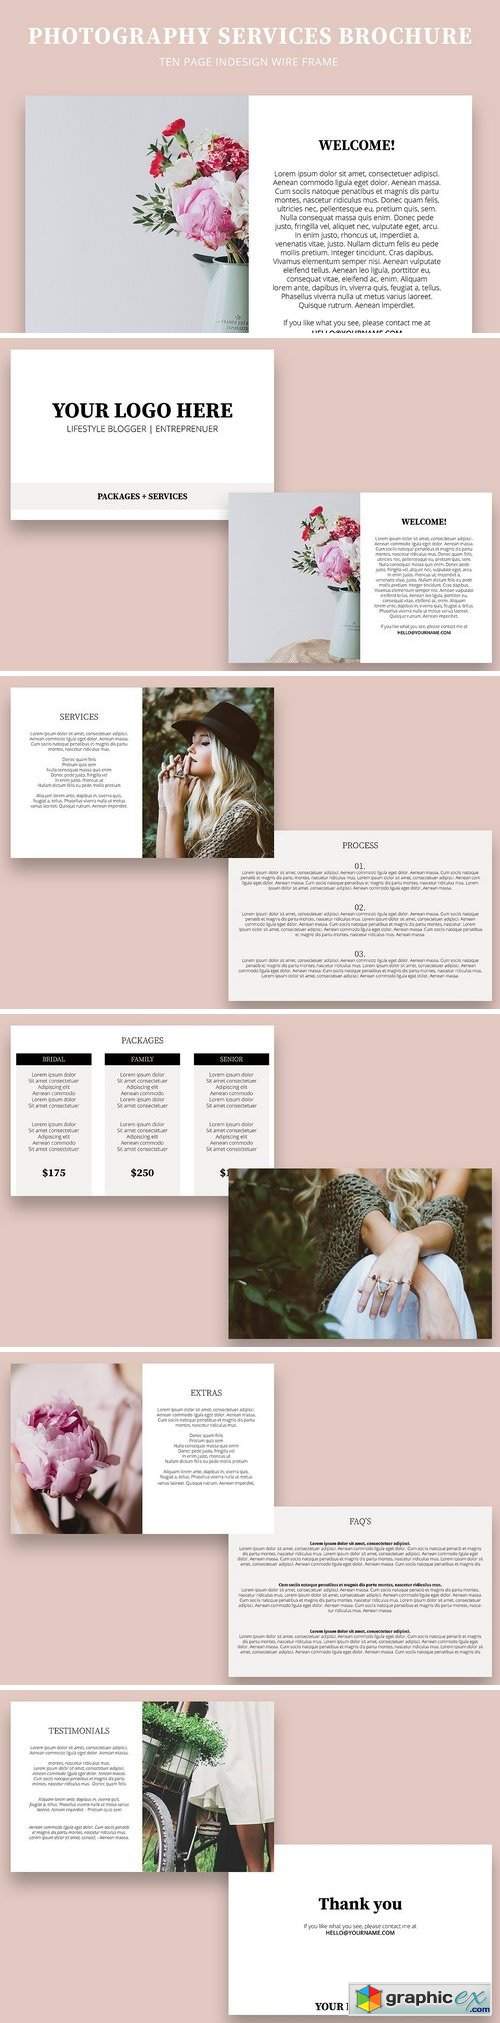 Photography Services Brochure